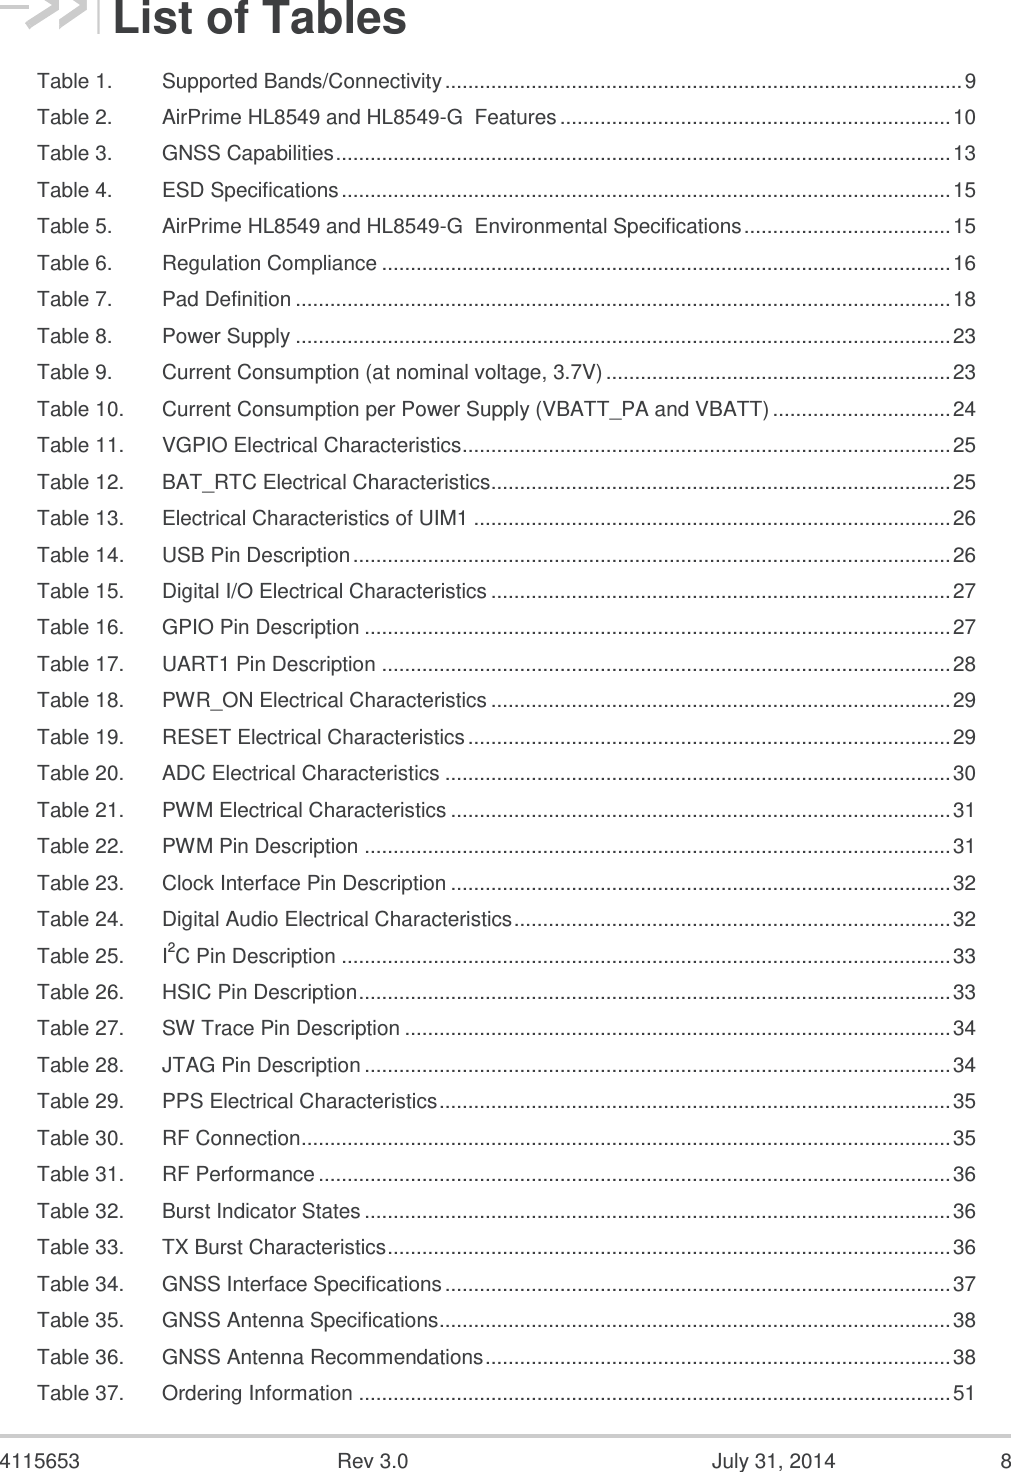  4115653  Rev 3.0  July 31, 2014  8 List of Tables Table 1. Supported Bands/Connectivity .......................................................................................... 9 Table 2. AirPrime HL8549 and HL8549-G  Features .................................................................... 10 Table 3. GNSS Capabilities ........................................................................................................... 13 Table 4. ESD Specifications .......................................................................................................... 15 Table 5. AirPrime HL8549 and HL8549-G  Environmental Specifications .................................... 15 Table 6. Regulation Compliance ................................................................................................... 16 Table 7. Pad Definition .................................................................................................................. 18 Table 8. Power Supply .................................................................................................................. 23 Table 9. Current Consumption (at nominal voltage, 3.7V) ............................................................ 23 Table 10. Current Consumption per Power Supply (VBATT_PA and VBATT) ............................... 24 Table 11. VGPIO Electrical Characteristics ..................................................................................... 25 Table 12. BAT_RTC Electrical Characteristics................................................................................ 25 Table 13. Electrical Characteristics of UIM1 ................................................................................... 26 Table 14. USB Pin Description ........................................................................................................ 26 Table 15. Digital I/O Electrical Characteristics ................................................................................ 27 Table 16. GPIO Pin Description ...................................................................................................... 27 Table 17. UART1 Pin Description ................................................................................................... 28 Table 18. PWR_ON Electrical Characteristics ................................................................................ 29 Table 19. RESET Electrical Characteristics .................................................................................... 29 Table 20. ADC Electrical Characteristics ........................................................................................ 30 Table 21. PWM Electrical Characteristics ....................................................................................... 31 Table 22. PWM Pin Description ...................................................................................................... 31 Table 23. Clock Interface Pin Description ....................................................................................... 32 Table 24. Digital Audio Electrical Characteristics ............................................................................ 32 Table 25. I2C Pin Description .......................................................................................................... 33 Table 26. HSIC Pin Description ....................................................................................................... 33 Table 27. SW Trace Pin Description ............................................................................................... 34 Table 28. JTAG Pin Description ...................................................................................................... 34 Table 29. PPS Electrical Characteristics ......................................................................................... 35 Table 30. RF Connection................................................................................................................. 35 Table 31. RF Performance .............................................................................................................. 36 Table 32. Burst Indicator States ...................................................................................................... 36 Table 33. TX Burst Characteristics .................................................................................................. 36 Table 34. GNSS Interface Specifications ........................................................................................ 37 Table 35. GNSS Antenna Specifications ......................................................................................... 38 Table 36. GNSS Antenna Recommendations ................................................................................. 38 Table 37. Ordering Information ....................................................................................................... 51 